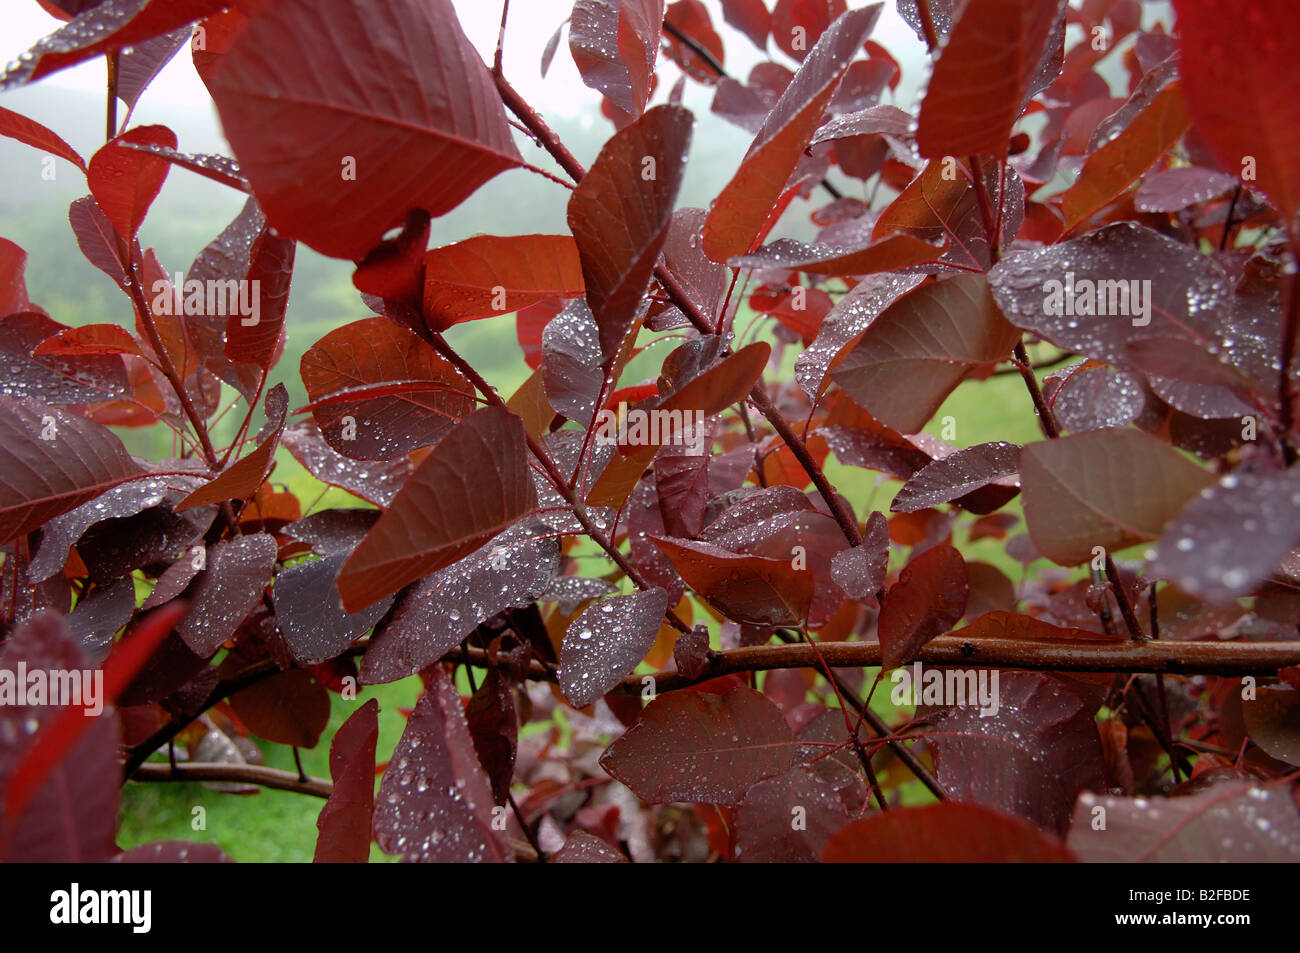 Smoke tree Cotinus coggygria leaves in a rain shower Stock Photo